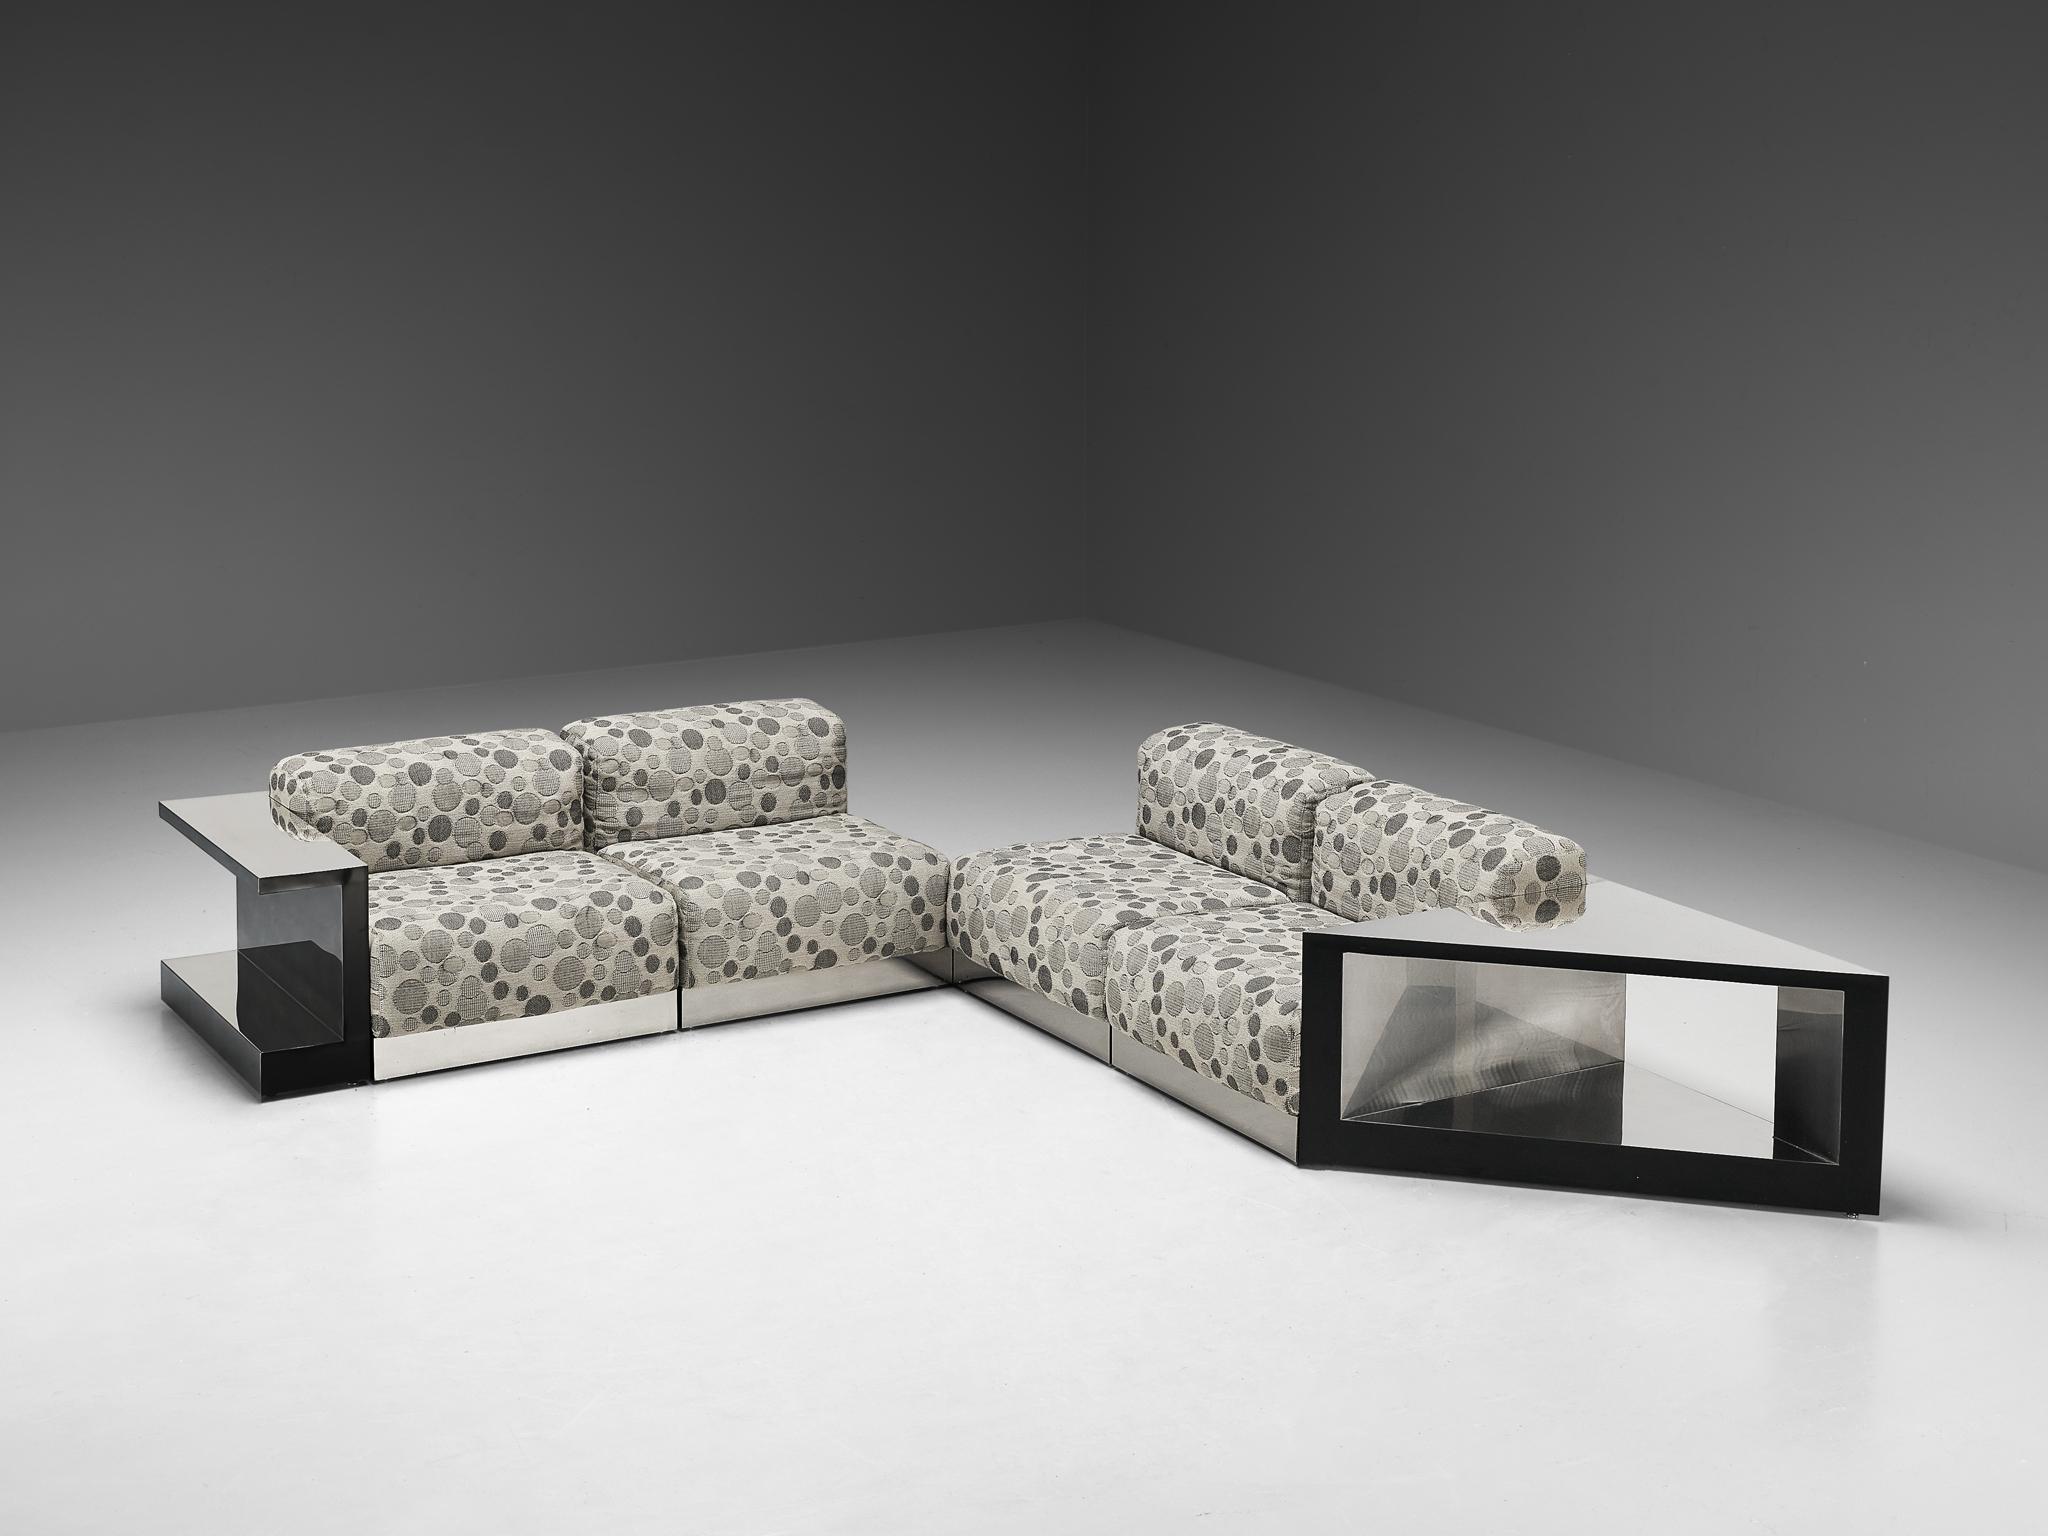 Modular sofa, fabric, chrome, metal, Italy, 1970s

Beautiful Italian sectional sofa with an eccentric choice of fabric. This stunning piece truly is a reflection of 1970s design. The variety of different elements in this set allows the user to